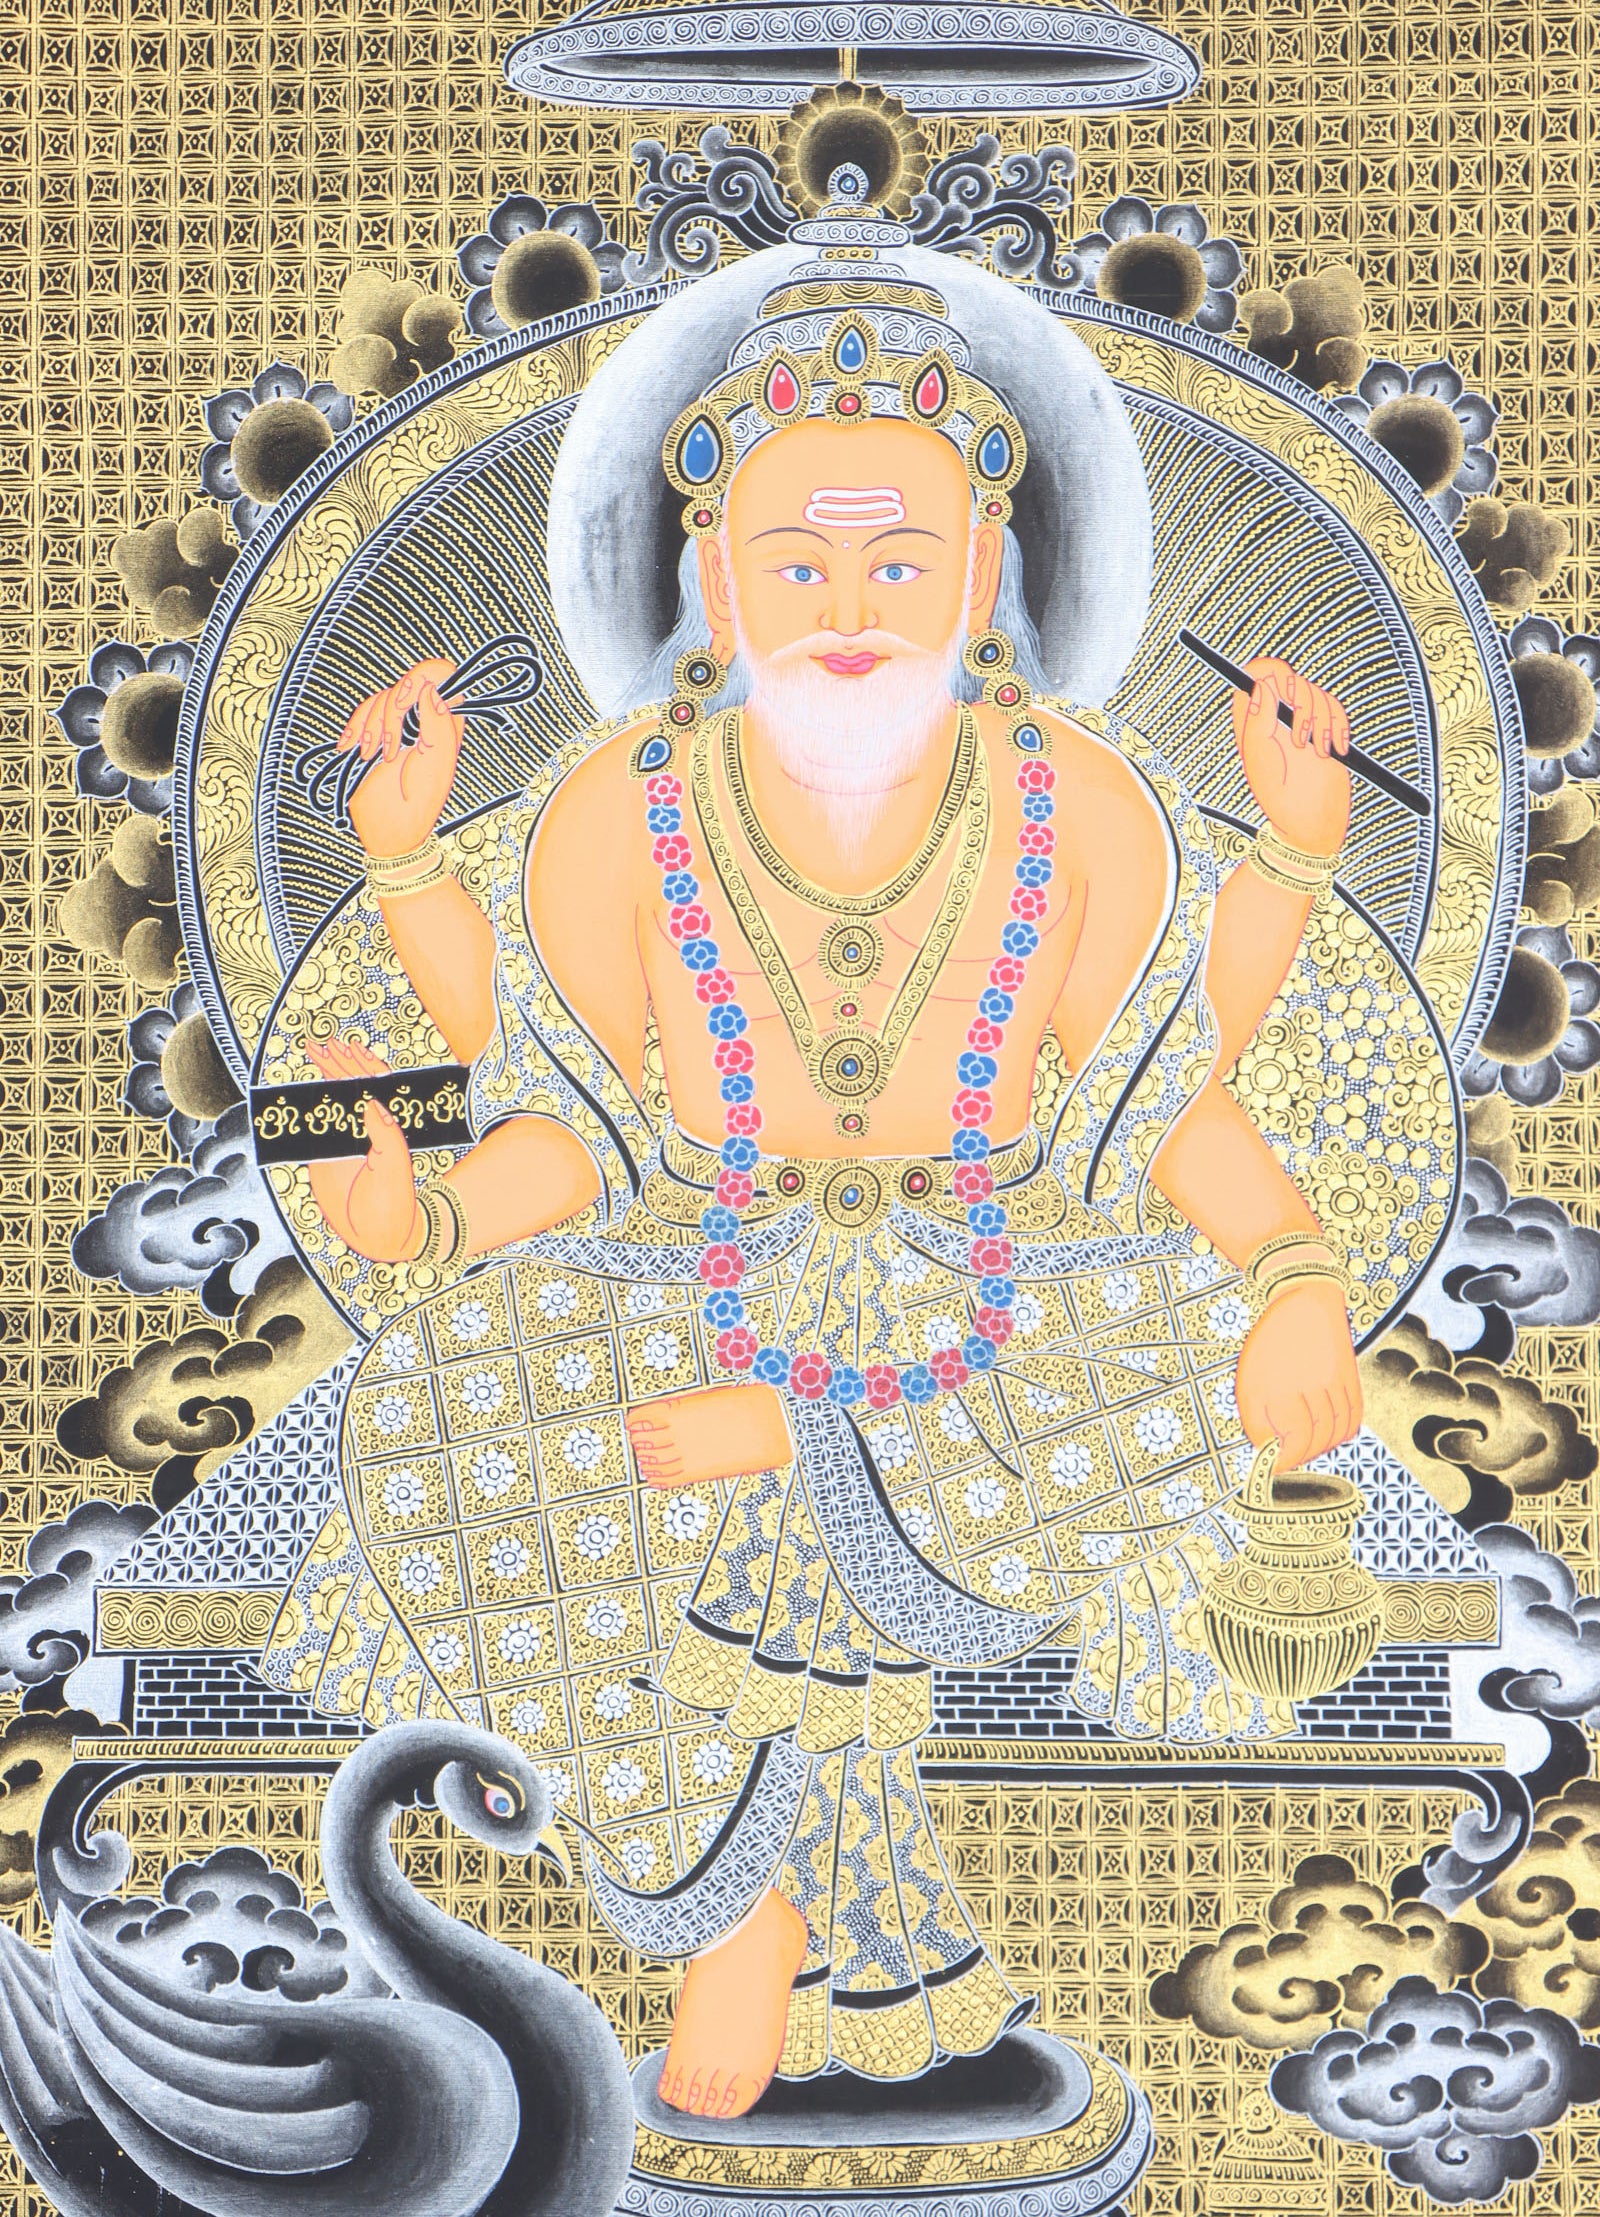 Vishwakarma Thangka for  his divine guidance and blessings.